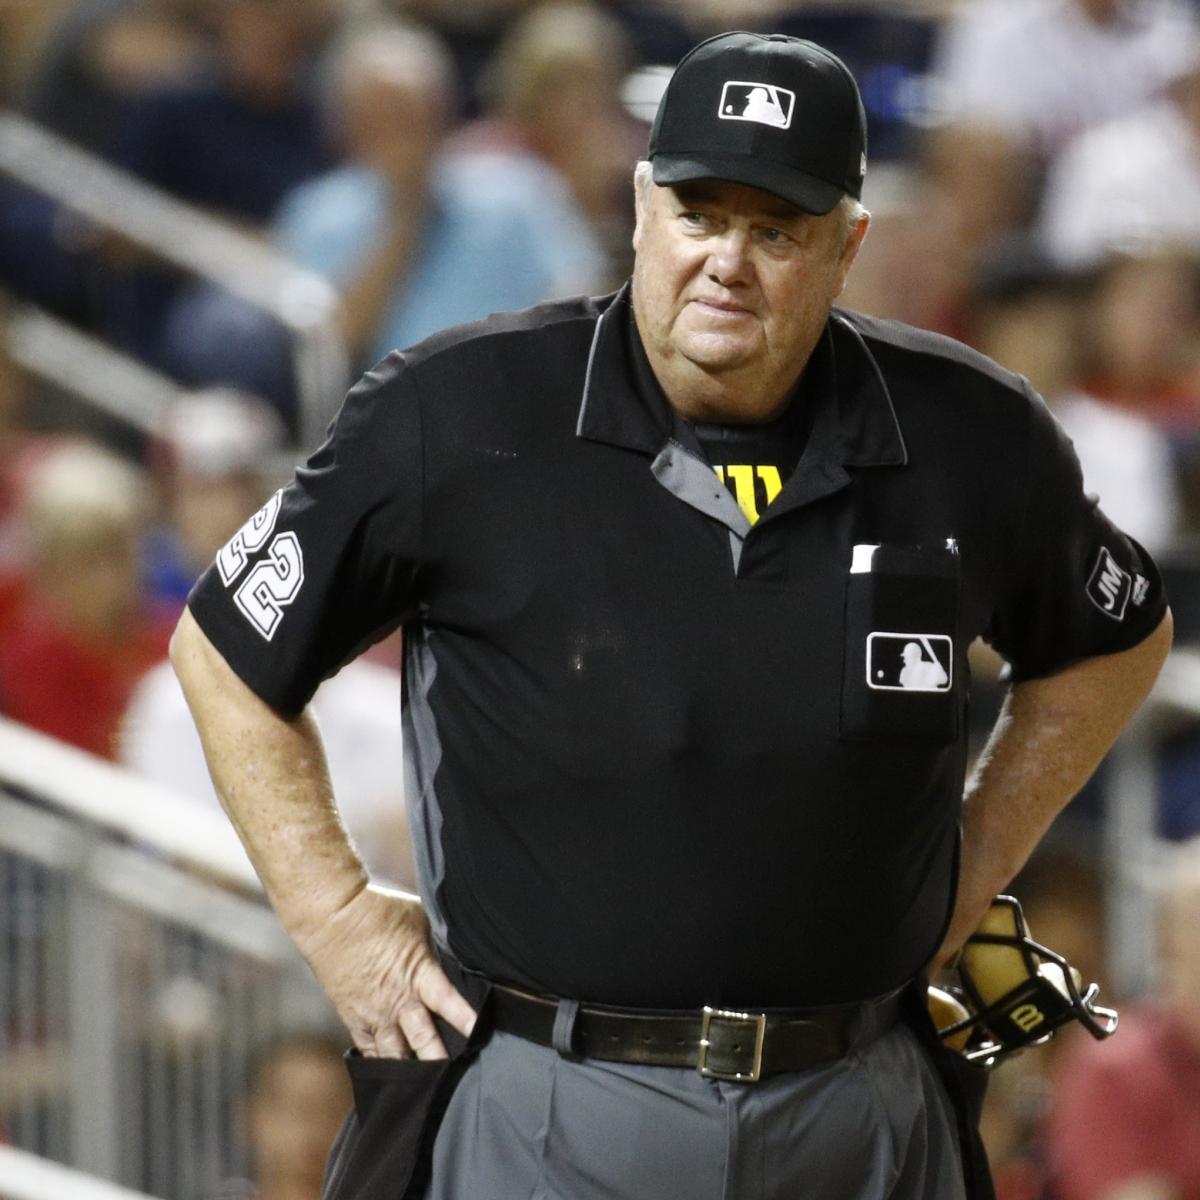 MLB Umpires Union Factors Assertion After Joe West’s Comments on COVID-19